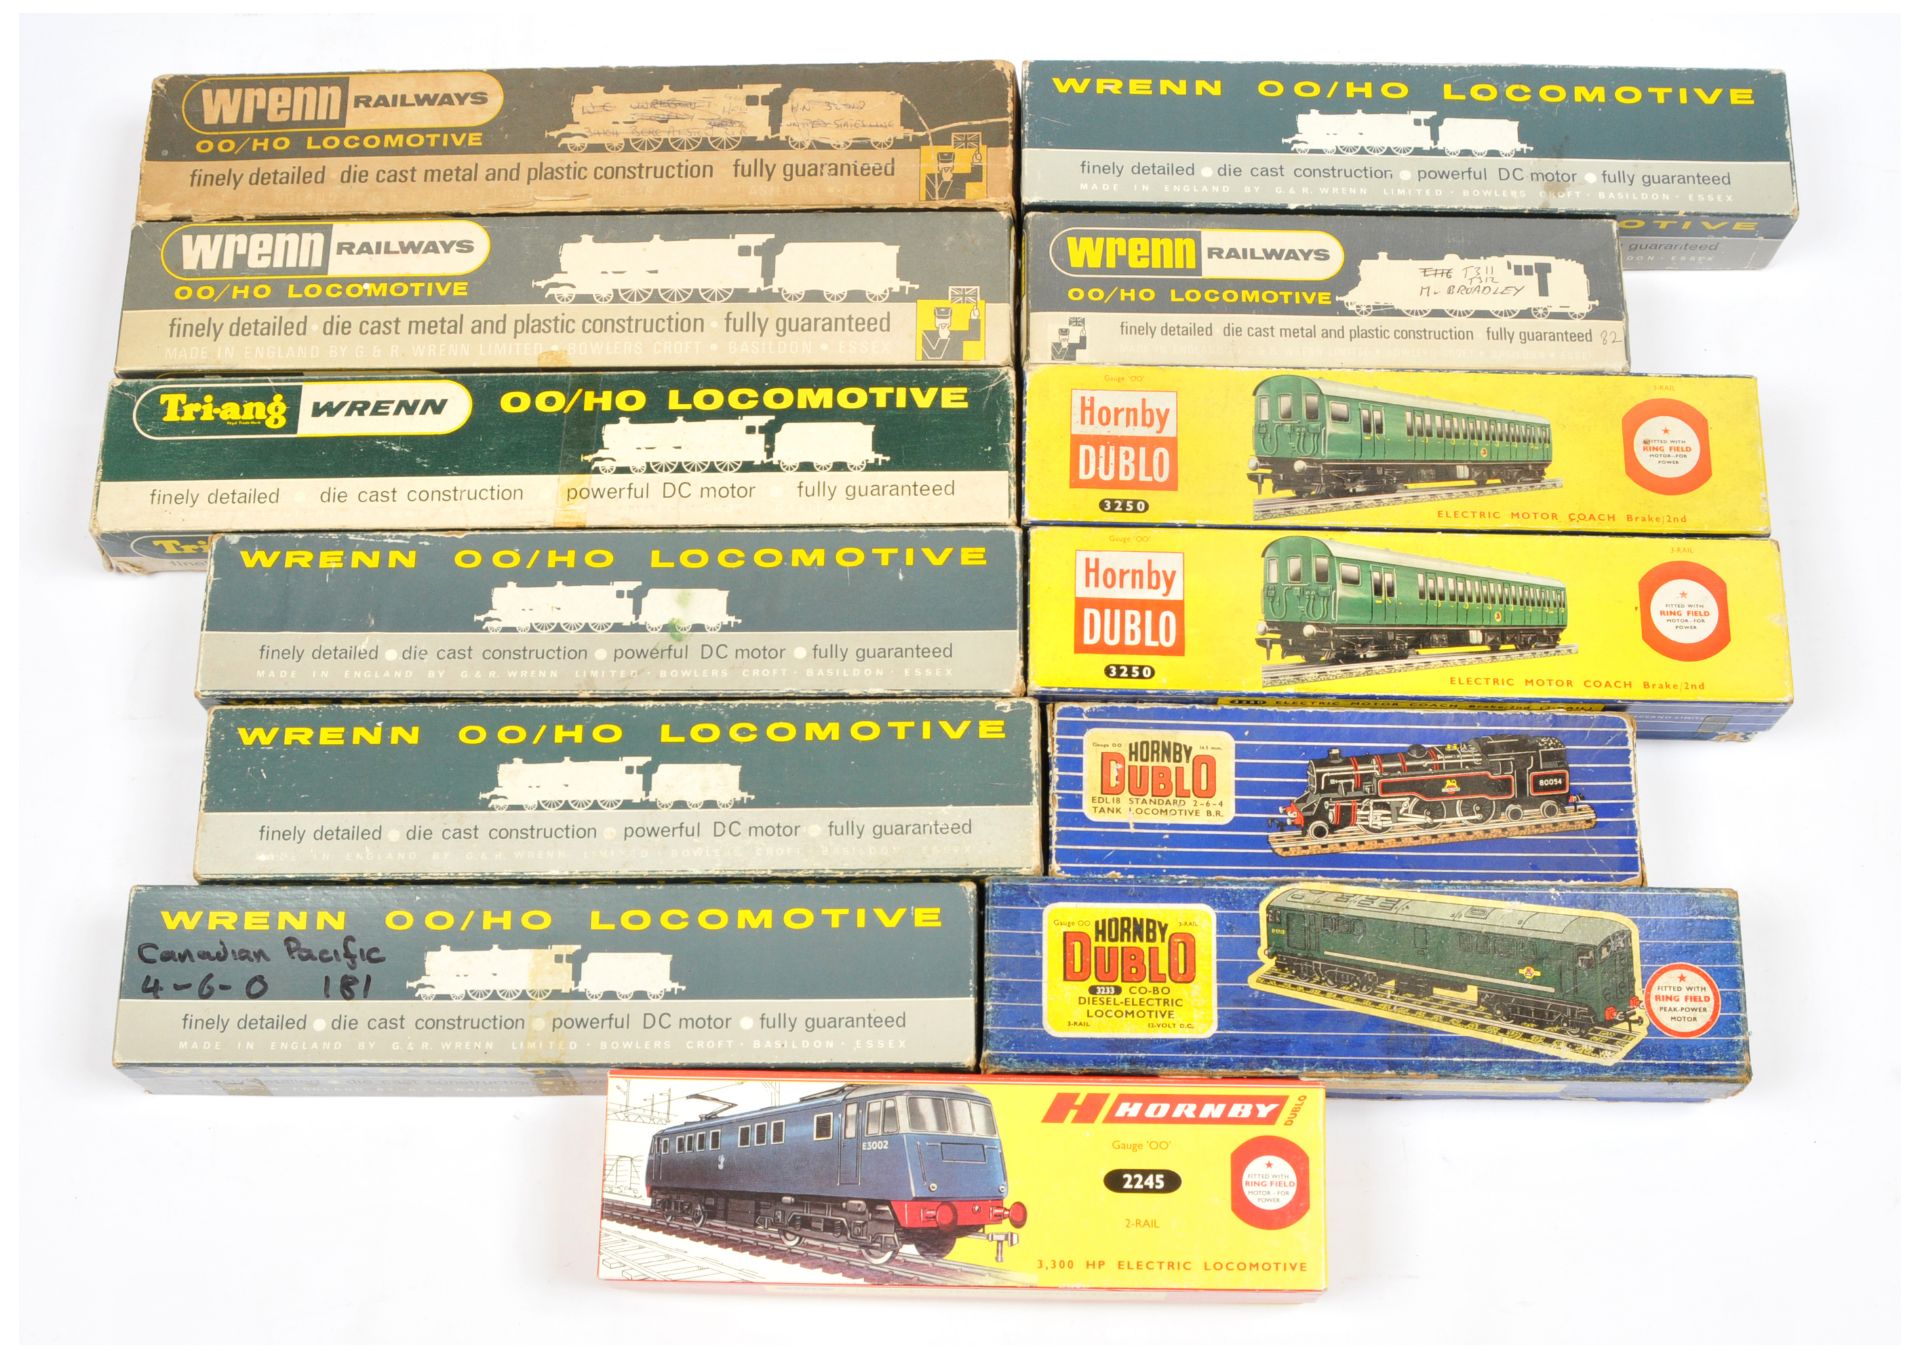 Hornby Dublo & Wrenn group of Empty Locomotive boxes to include 